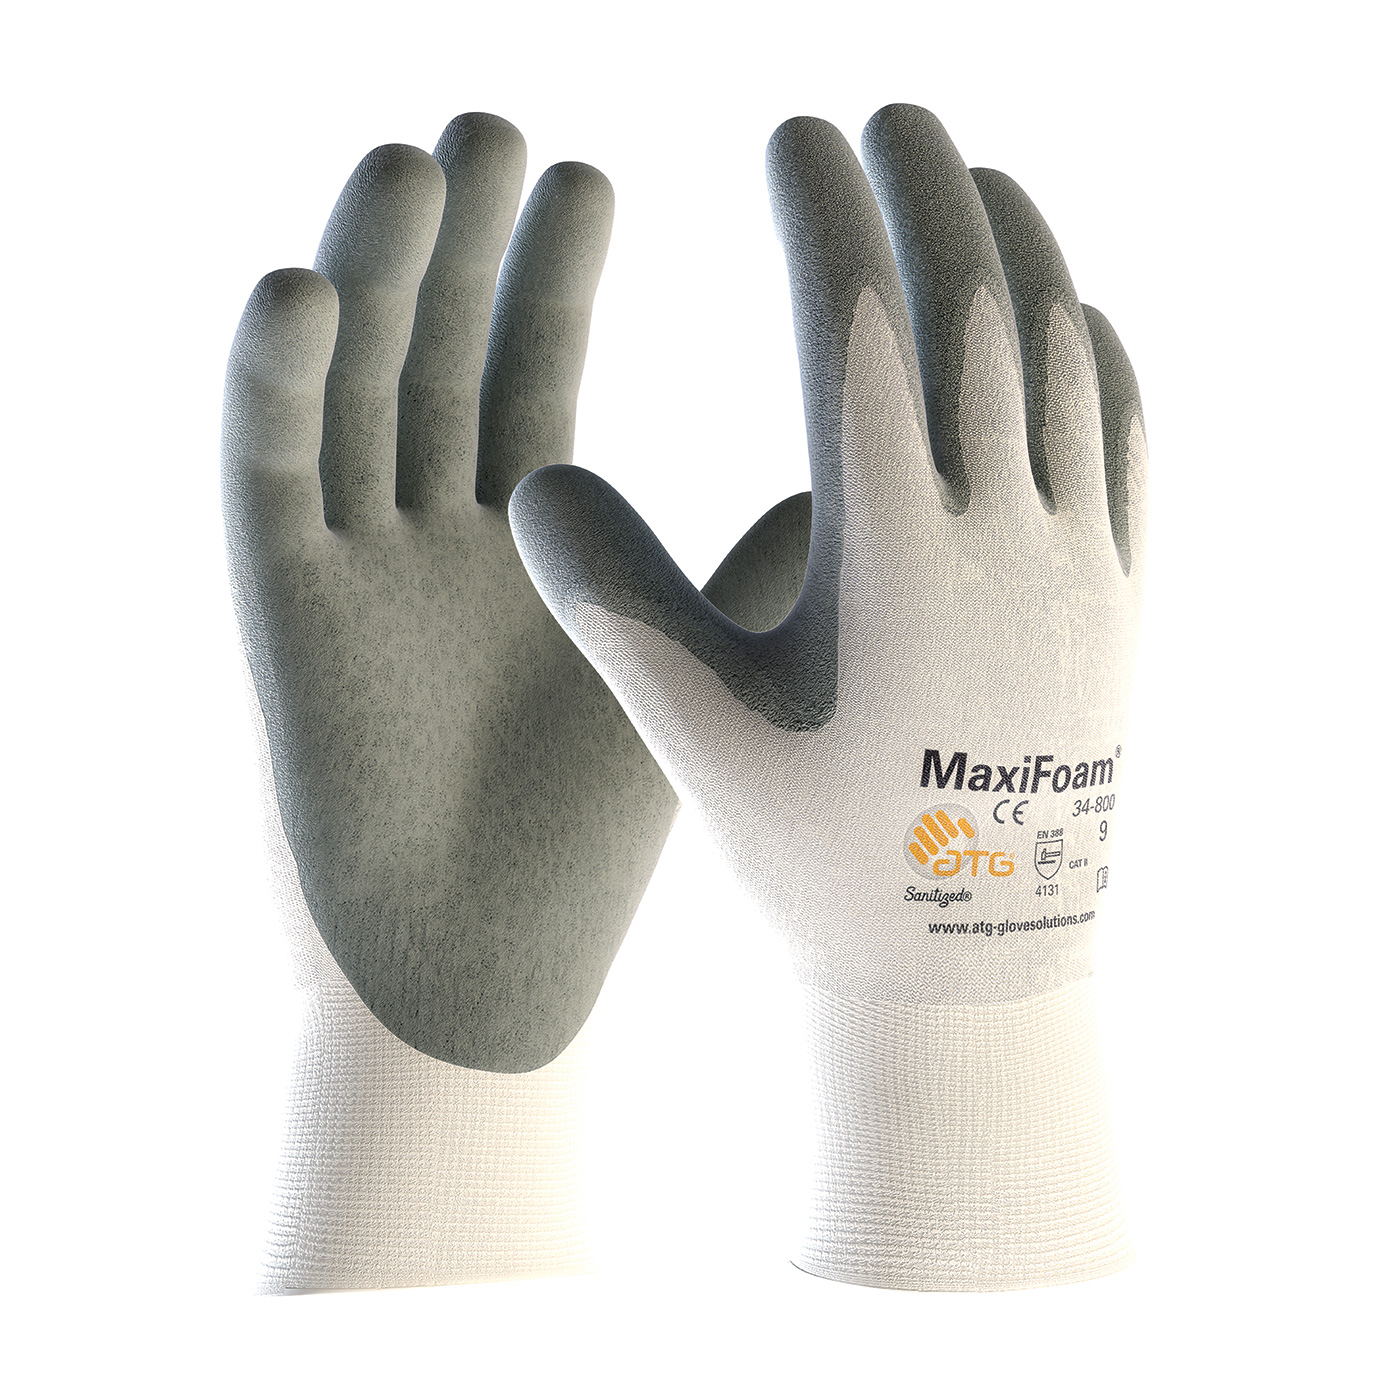 PIP 34-800/S MaxiFoam Premium Eeamless Knit Nylon Glove with Nitrile Coated Foam Grip on Palm & Fingers - Small PID-34 800 S